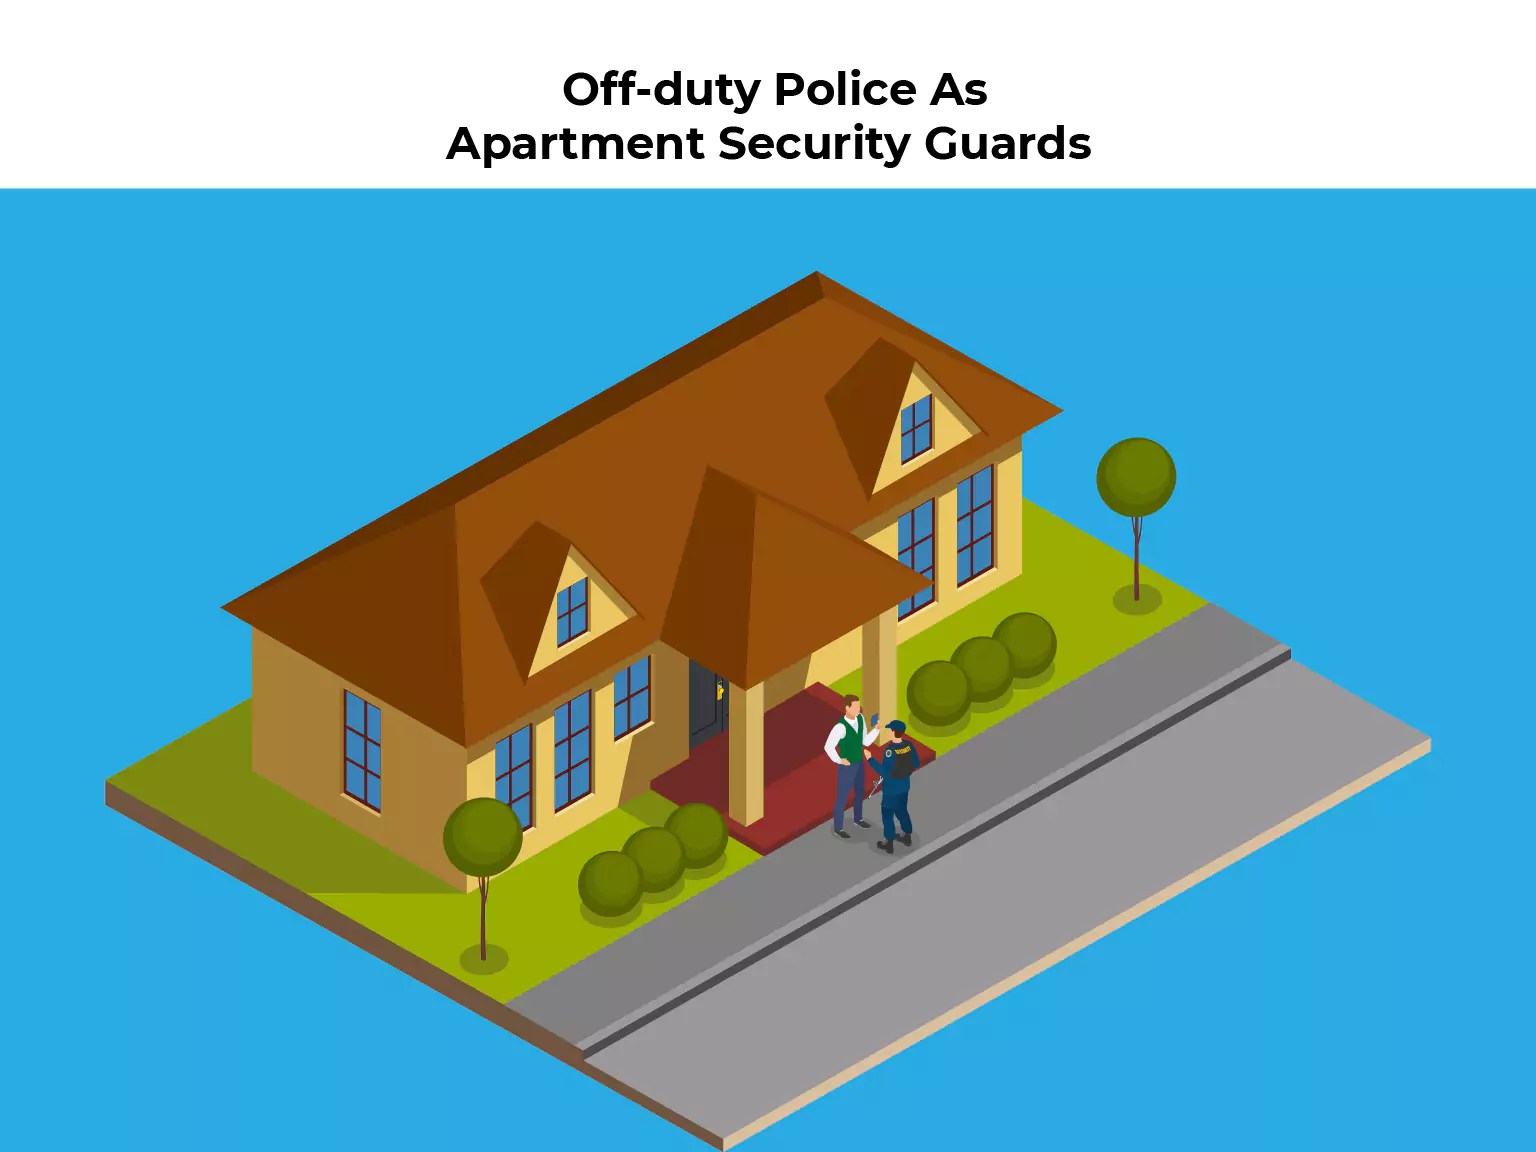 Off-duty police as apartment security guards